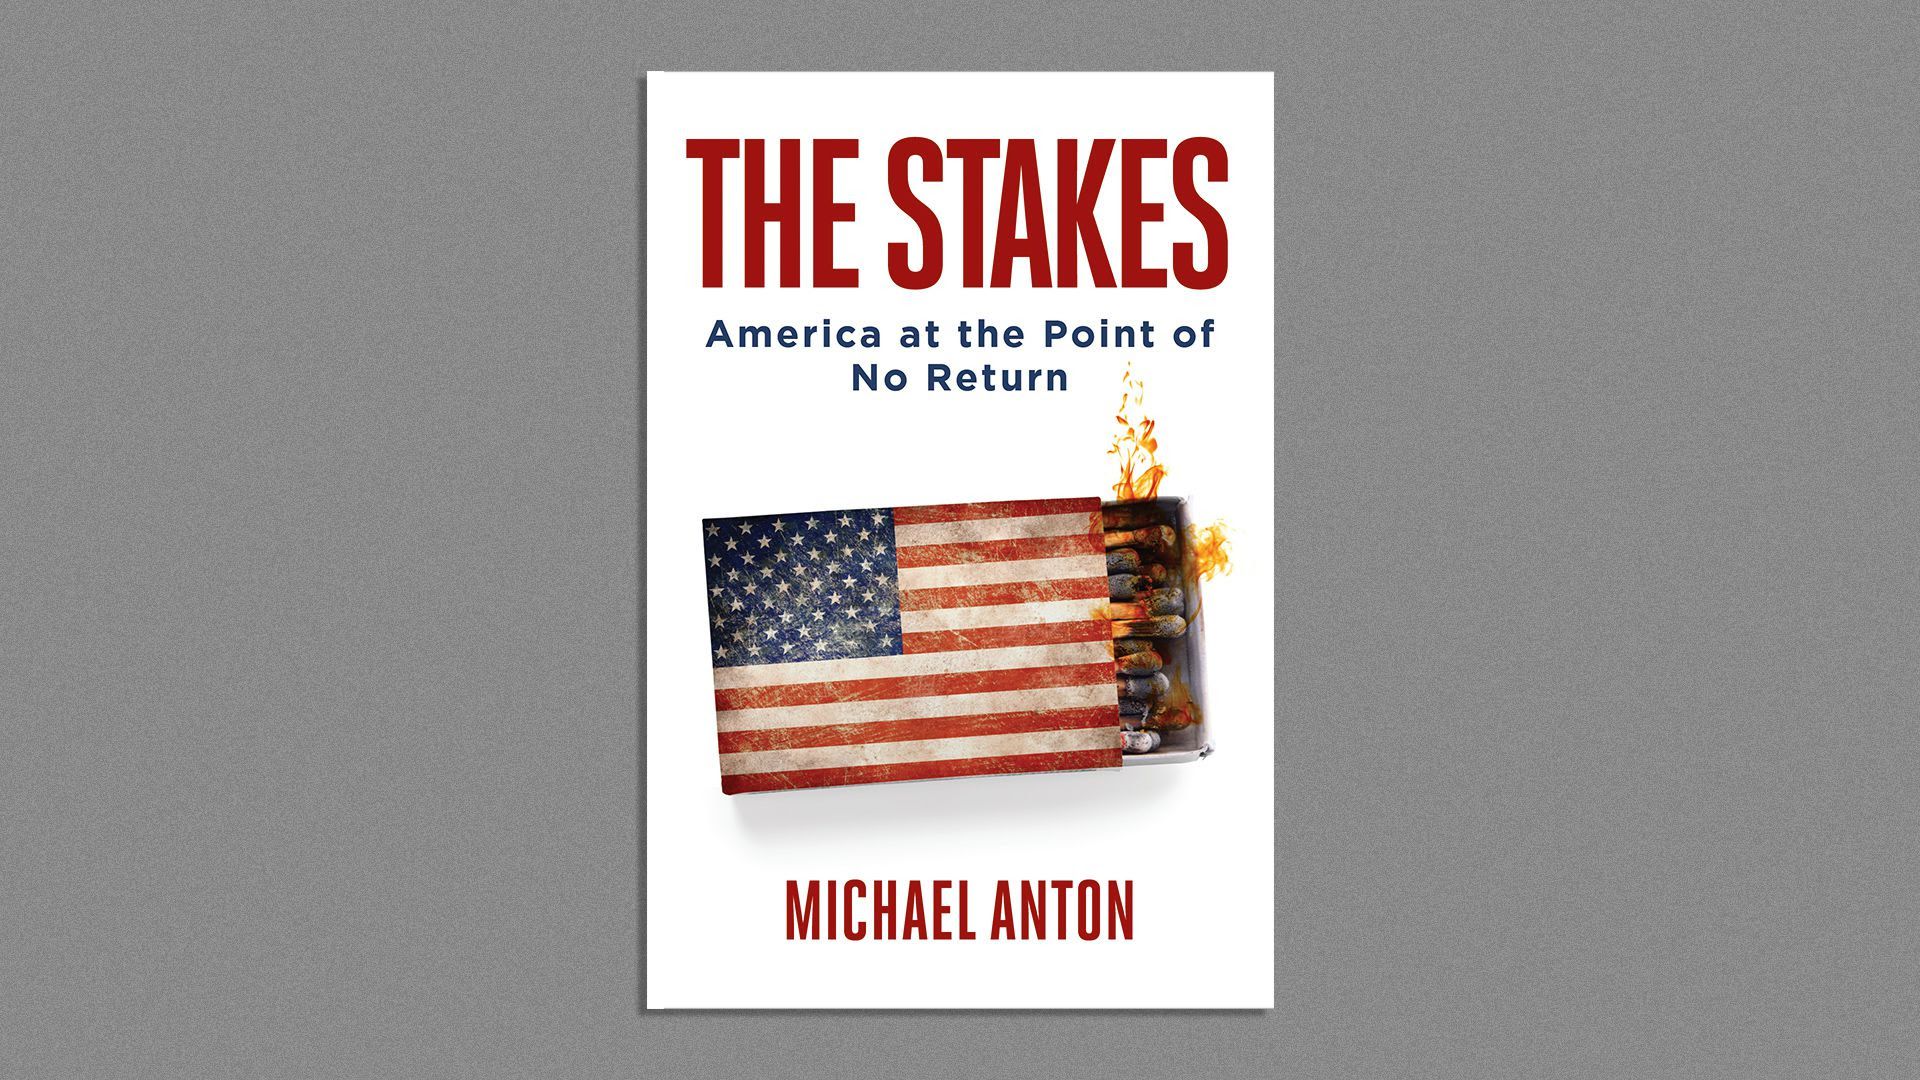 The book over of "The Stakes" shows a match box with the America flag on it in flames